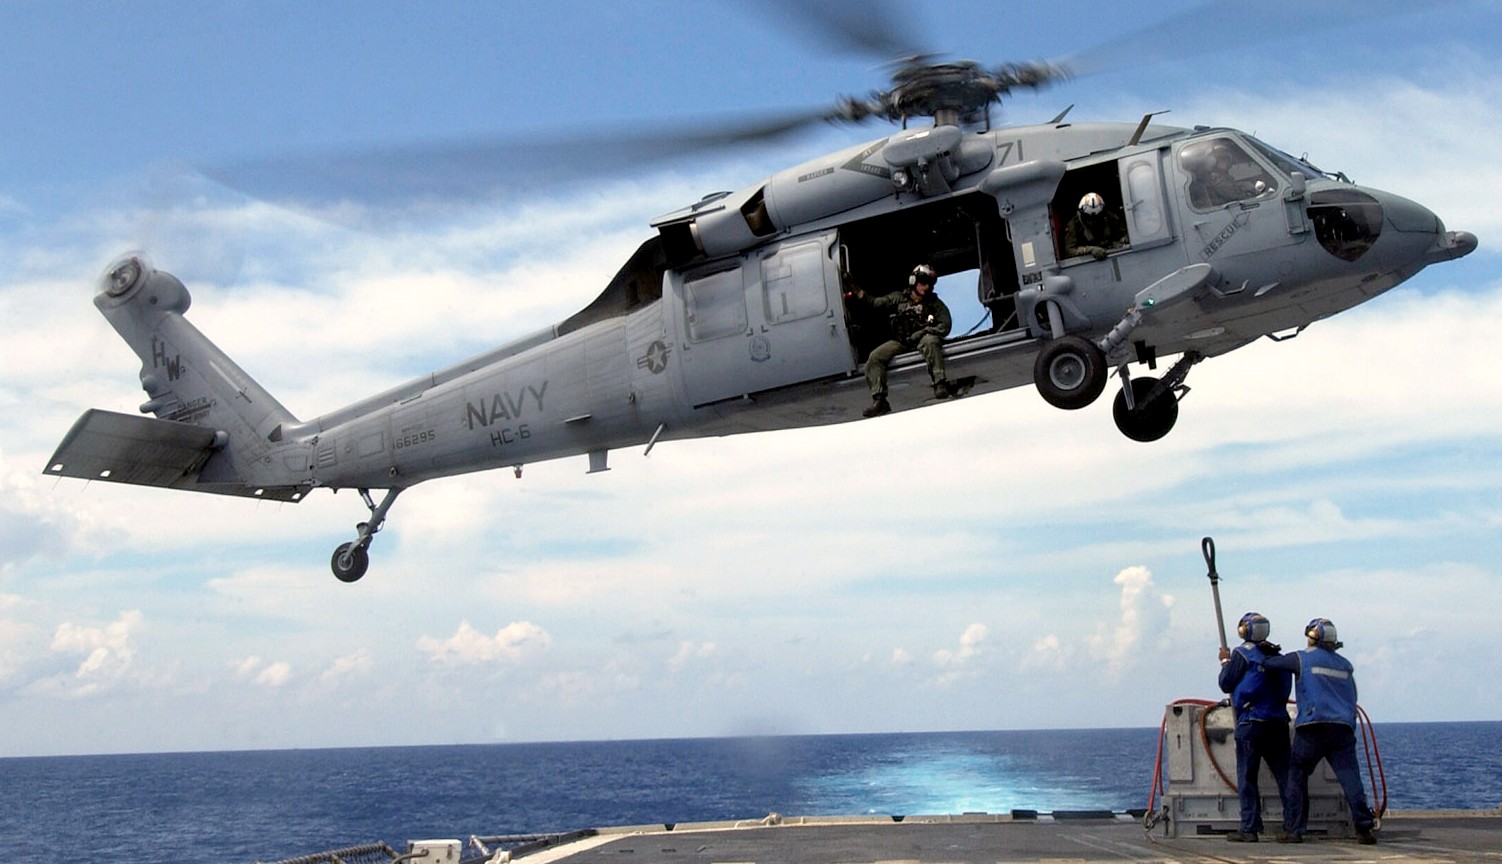 hc-6 chargers helicopter combat support squadron navy mh-60s seahawk 46